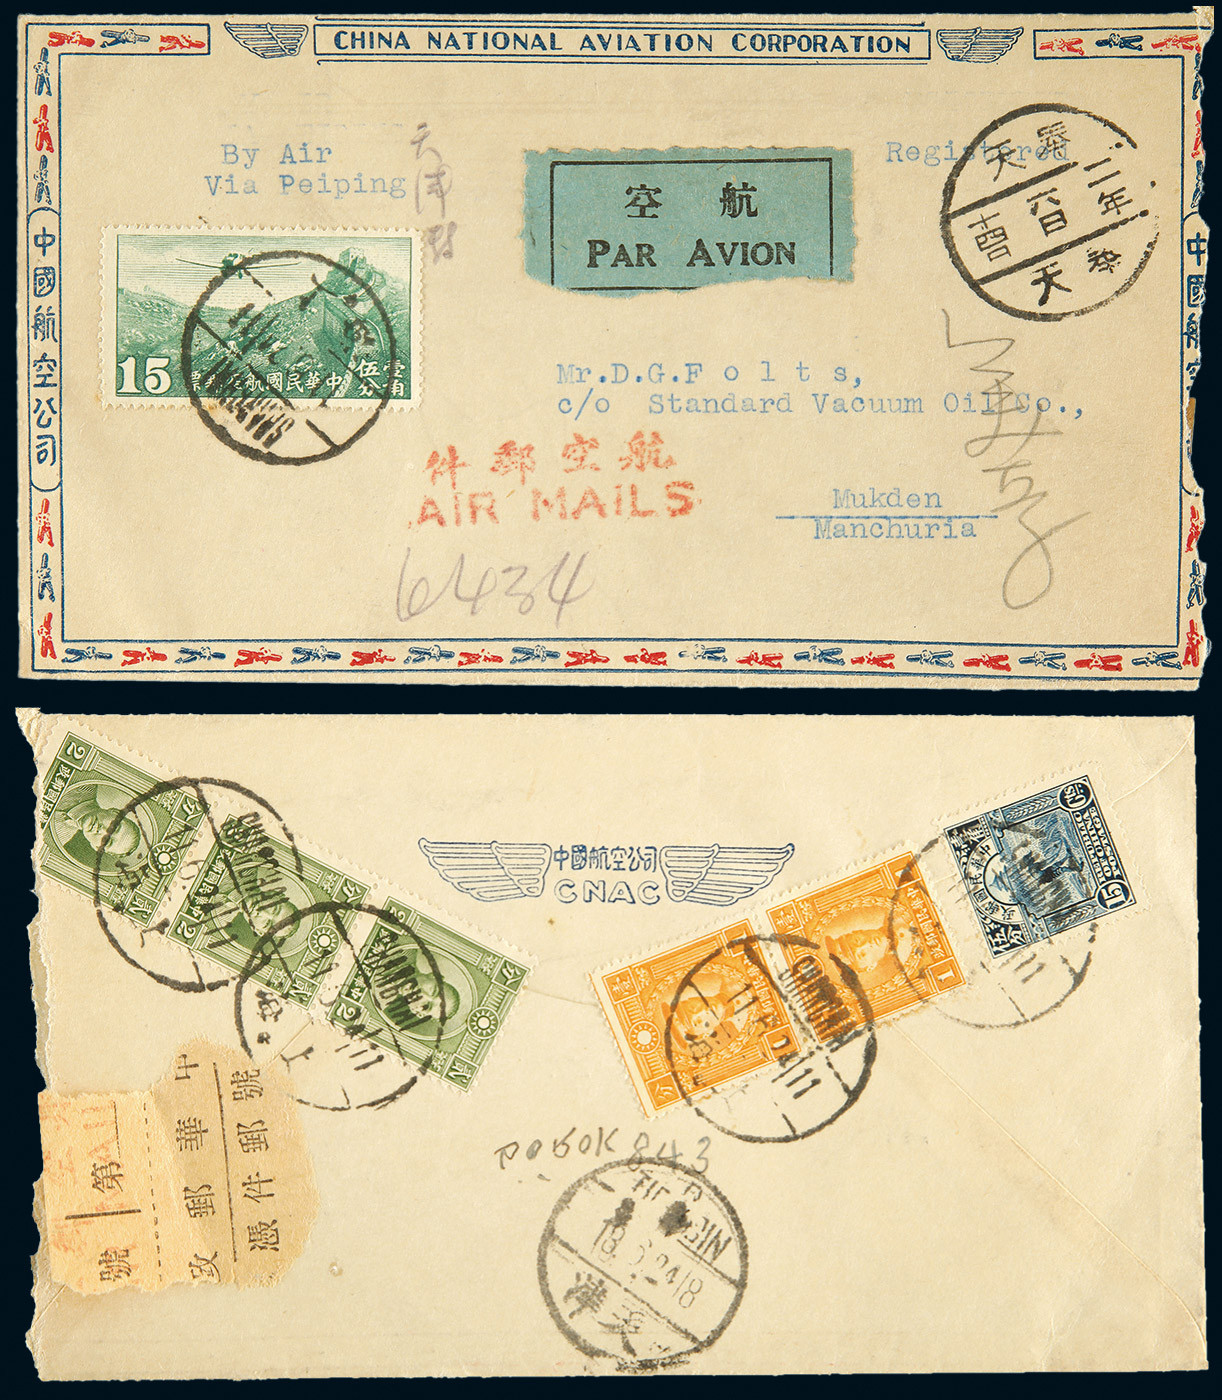 1935 Air mail cover sent from Shanghai to Fengtian. Nice condition